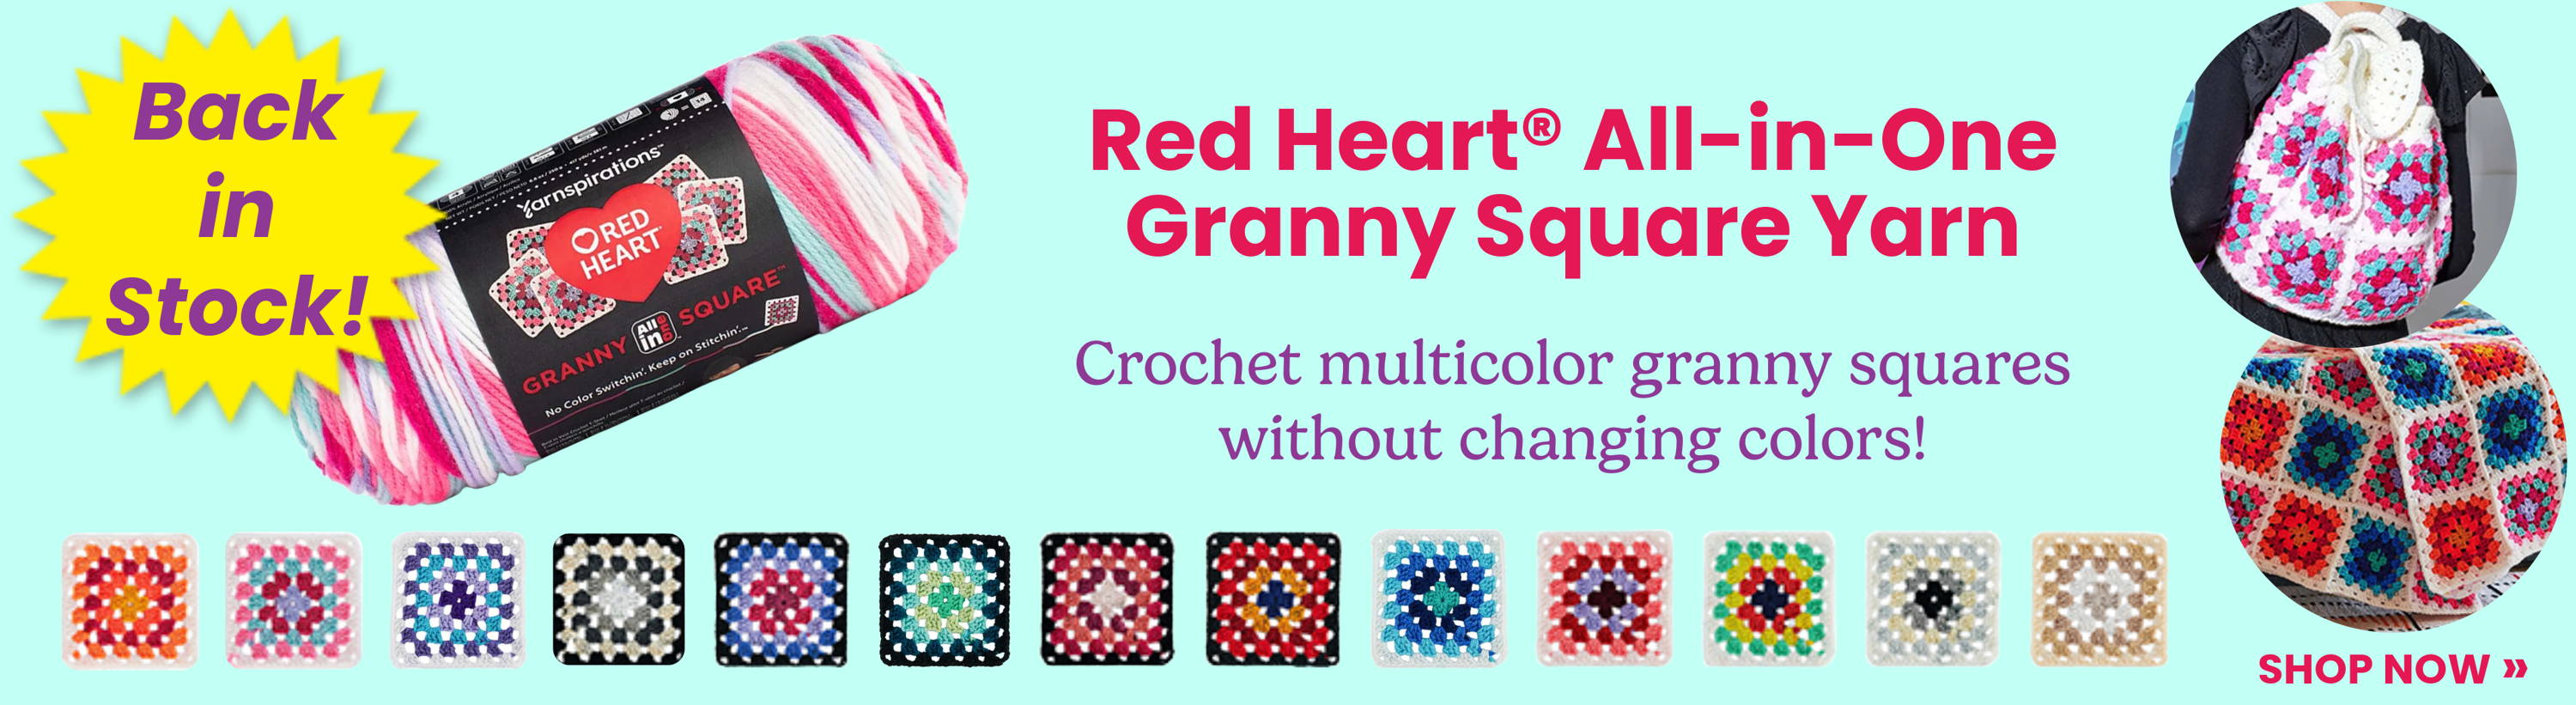 Back In Stock! Red Heart® All-in-One Granny Square Yarn. Crochet multicolor granny squares without changing colors! Image: Red Heart® Granny Square colorway swatches.